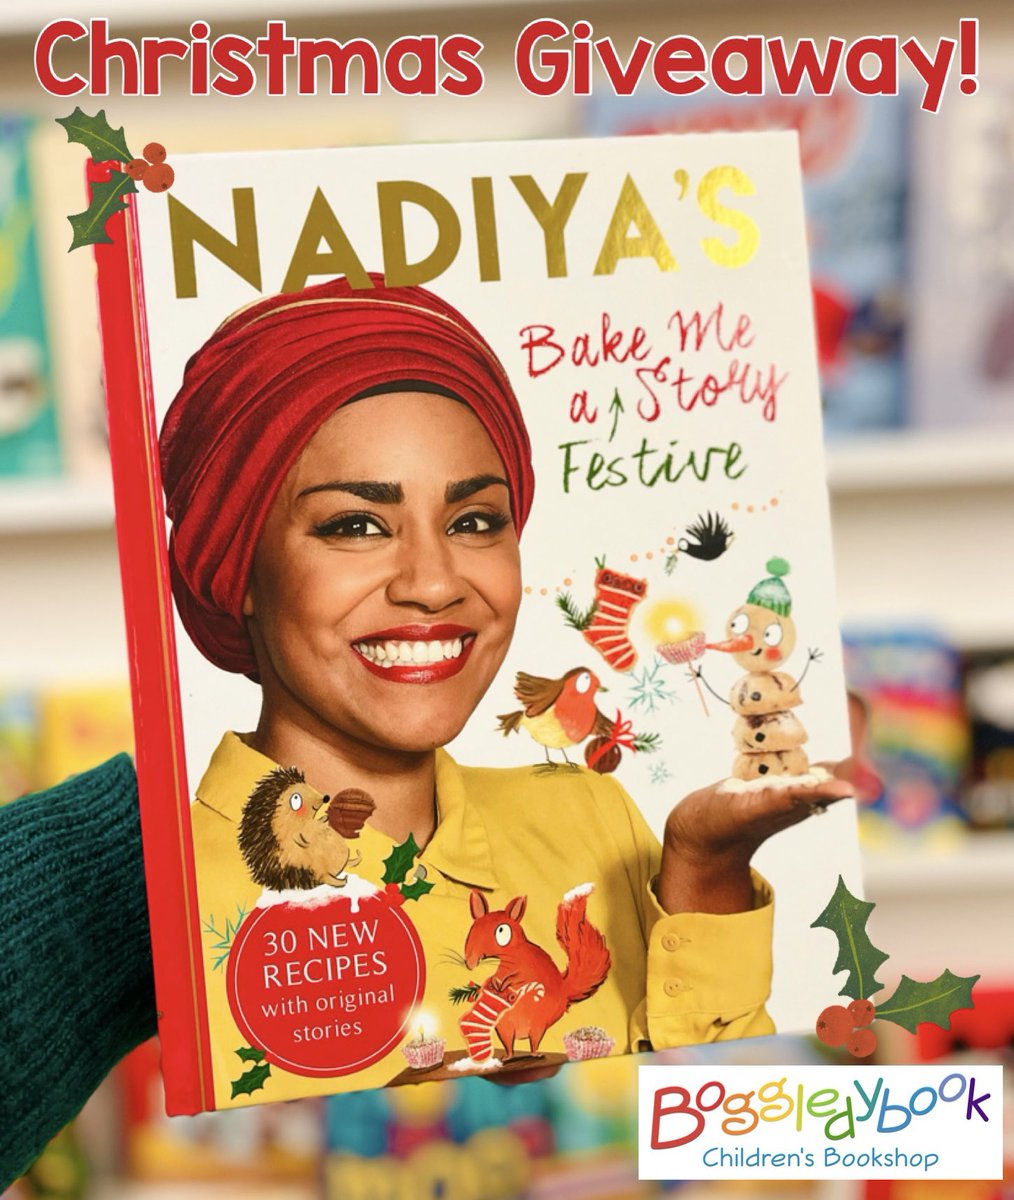 📚🎄CHRISTMAS GIVEAWAY! 🎄📚 It’s December, time for a Christmas giveaway!! 🎅🏼 We’ve chosen Nadiya Hussain’s brilliant Bake Me A Festive Story from our Handpicked £5 Gift Range for one lucky winner! 🤗 To enter just like, repost and comment with a festive emoji 🎅🏼🎄 Enter on